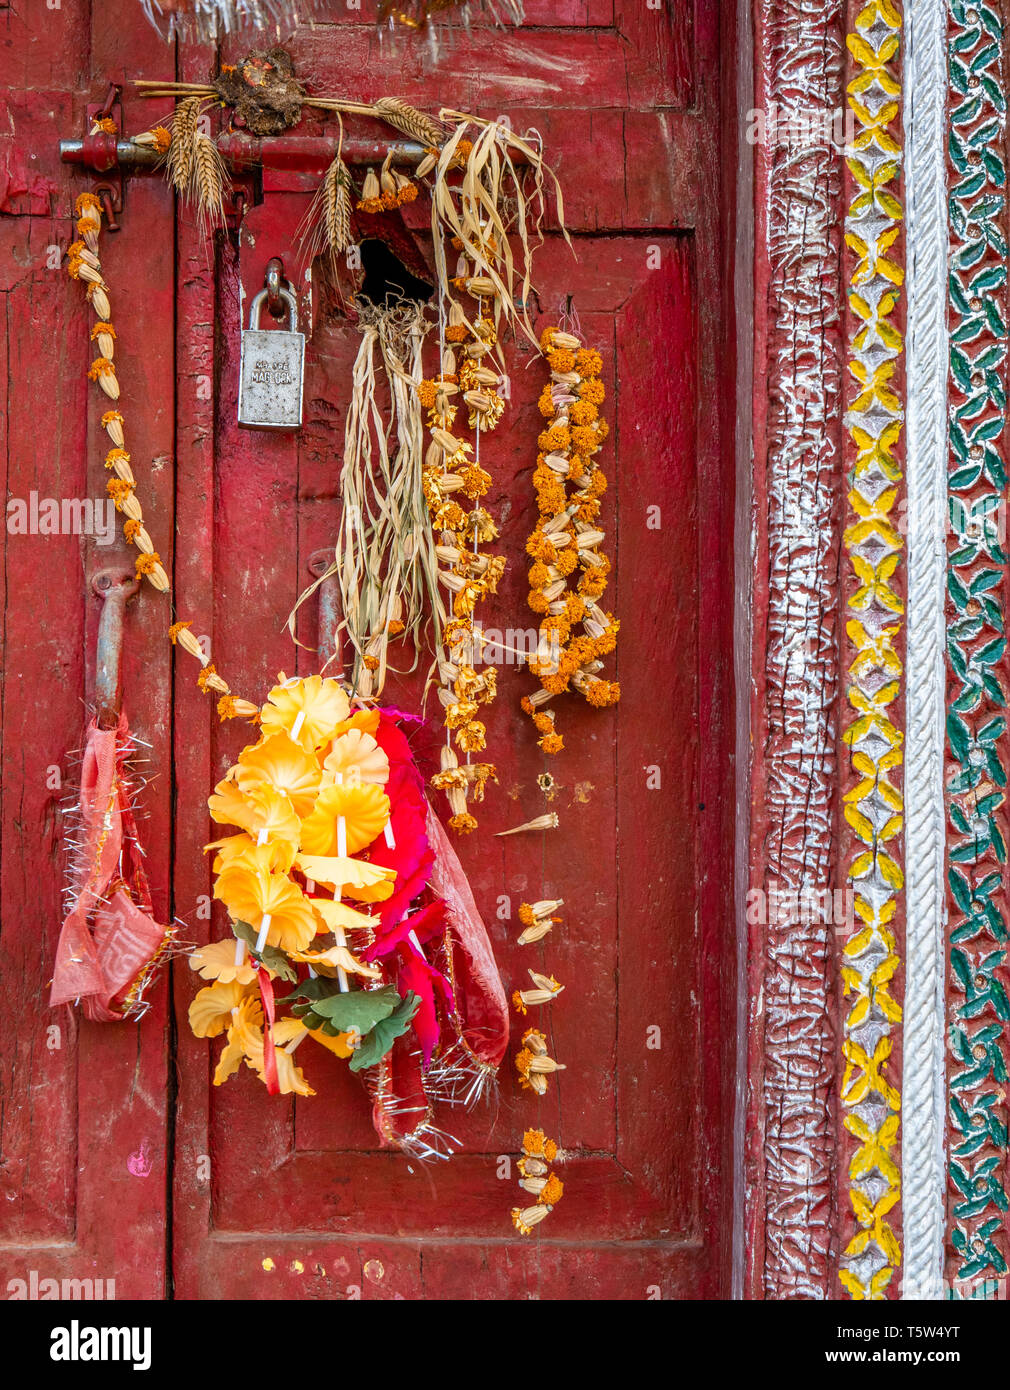 Elaborately decorated doors and windows of the principal house in Supi village high up in the Saryu Valley of the Uttarakhand Himalayas northern India Stock Photo